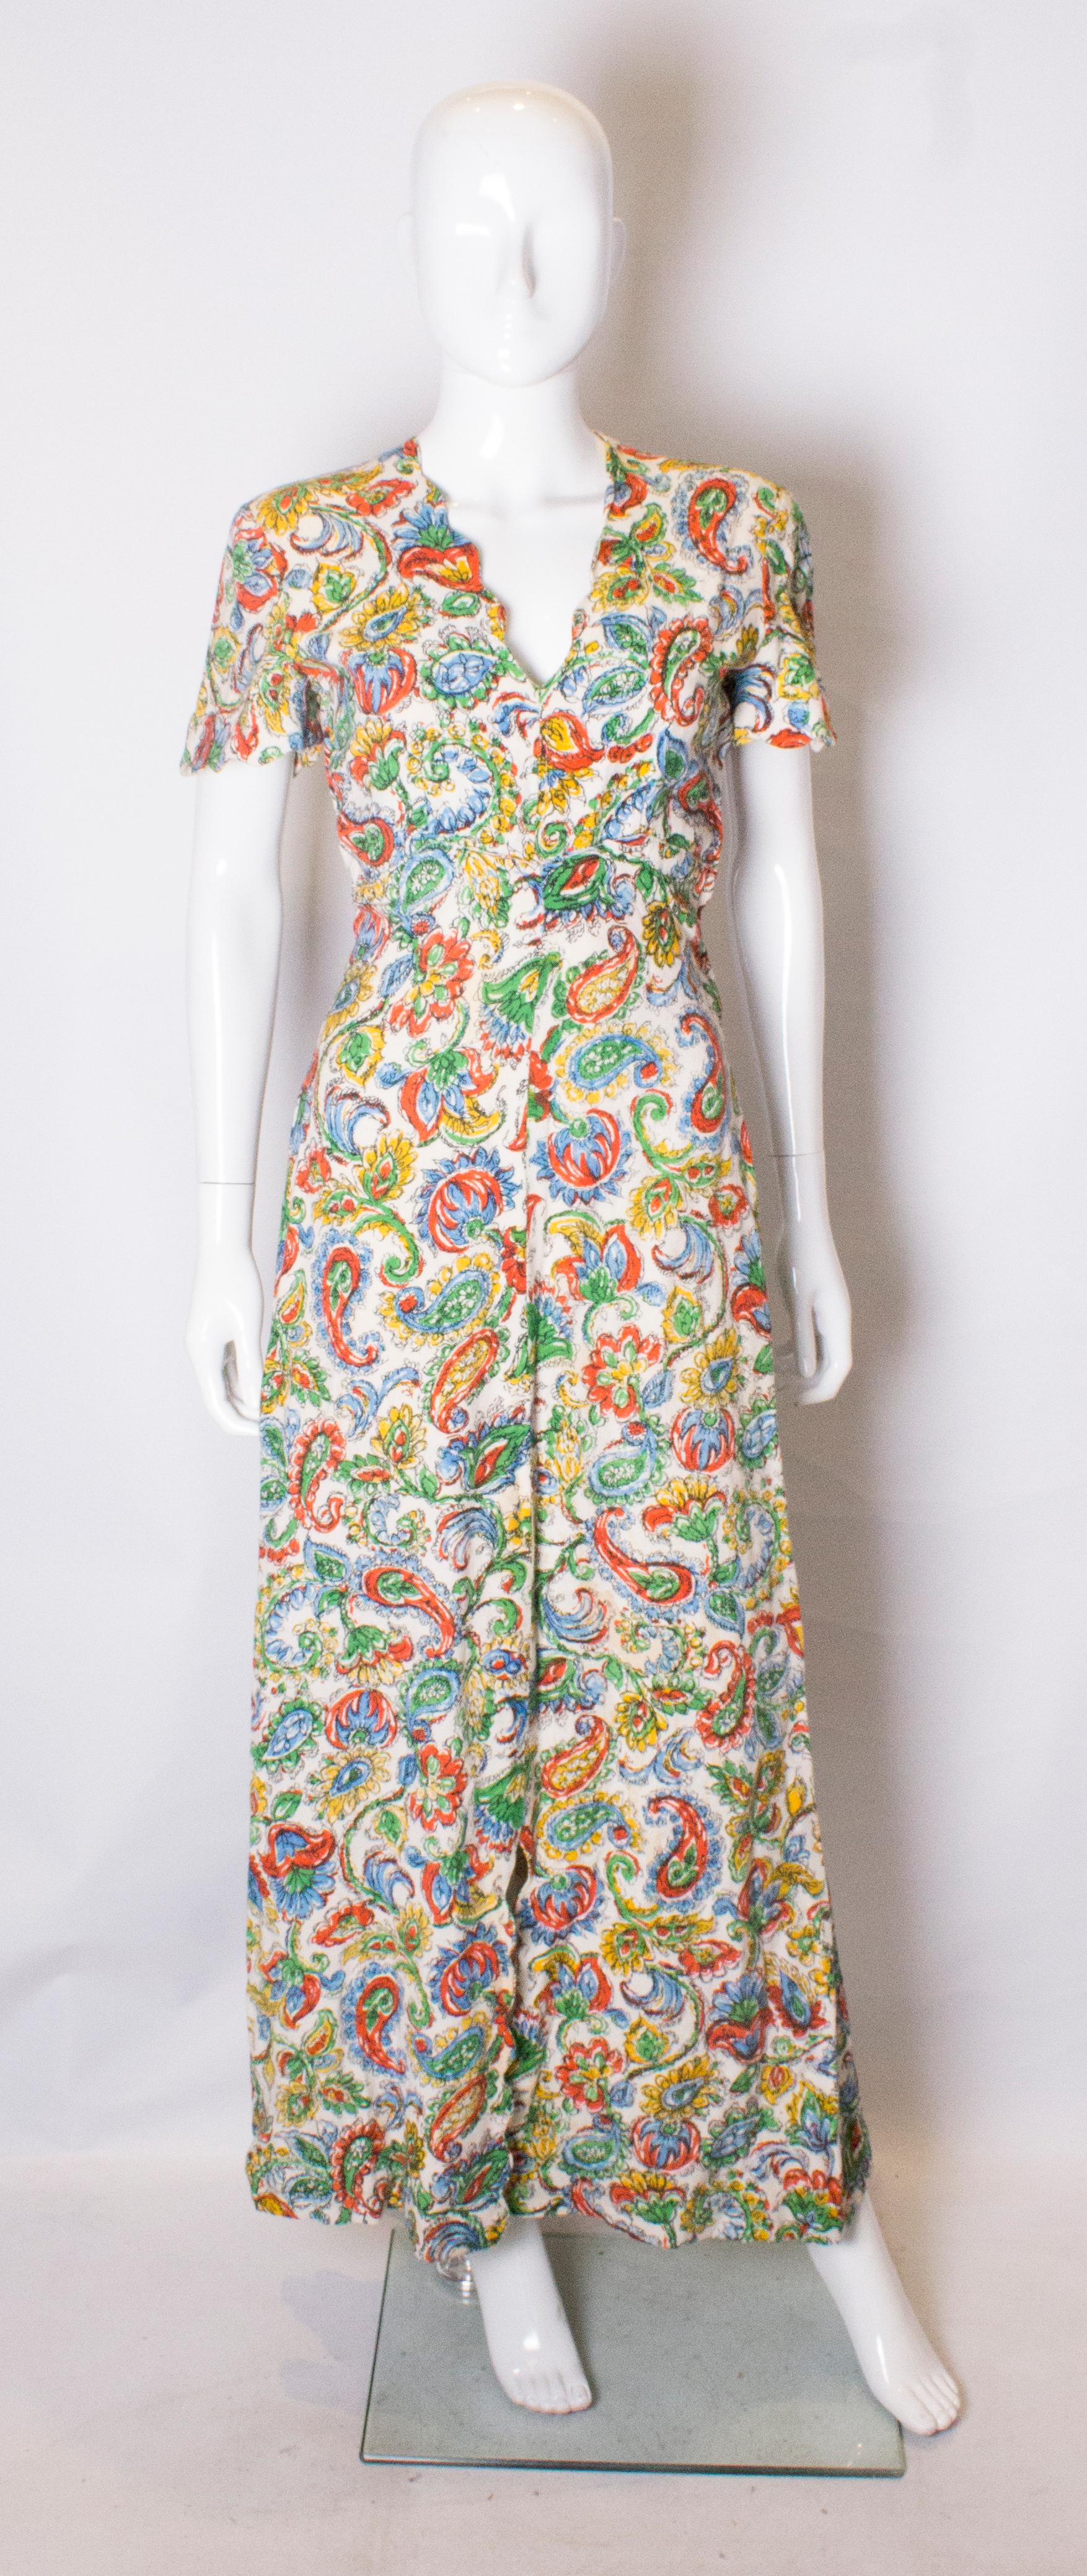 A stunning linen print gown from the 1940s .
The dress has a scallop edged neckline and sleaves with a popper opening at the side. it has a white background with multi colour print.